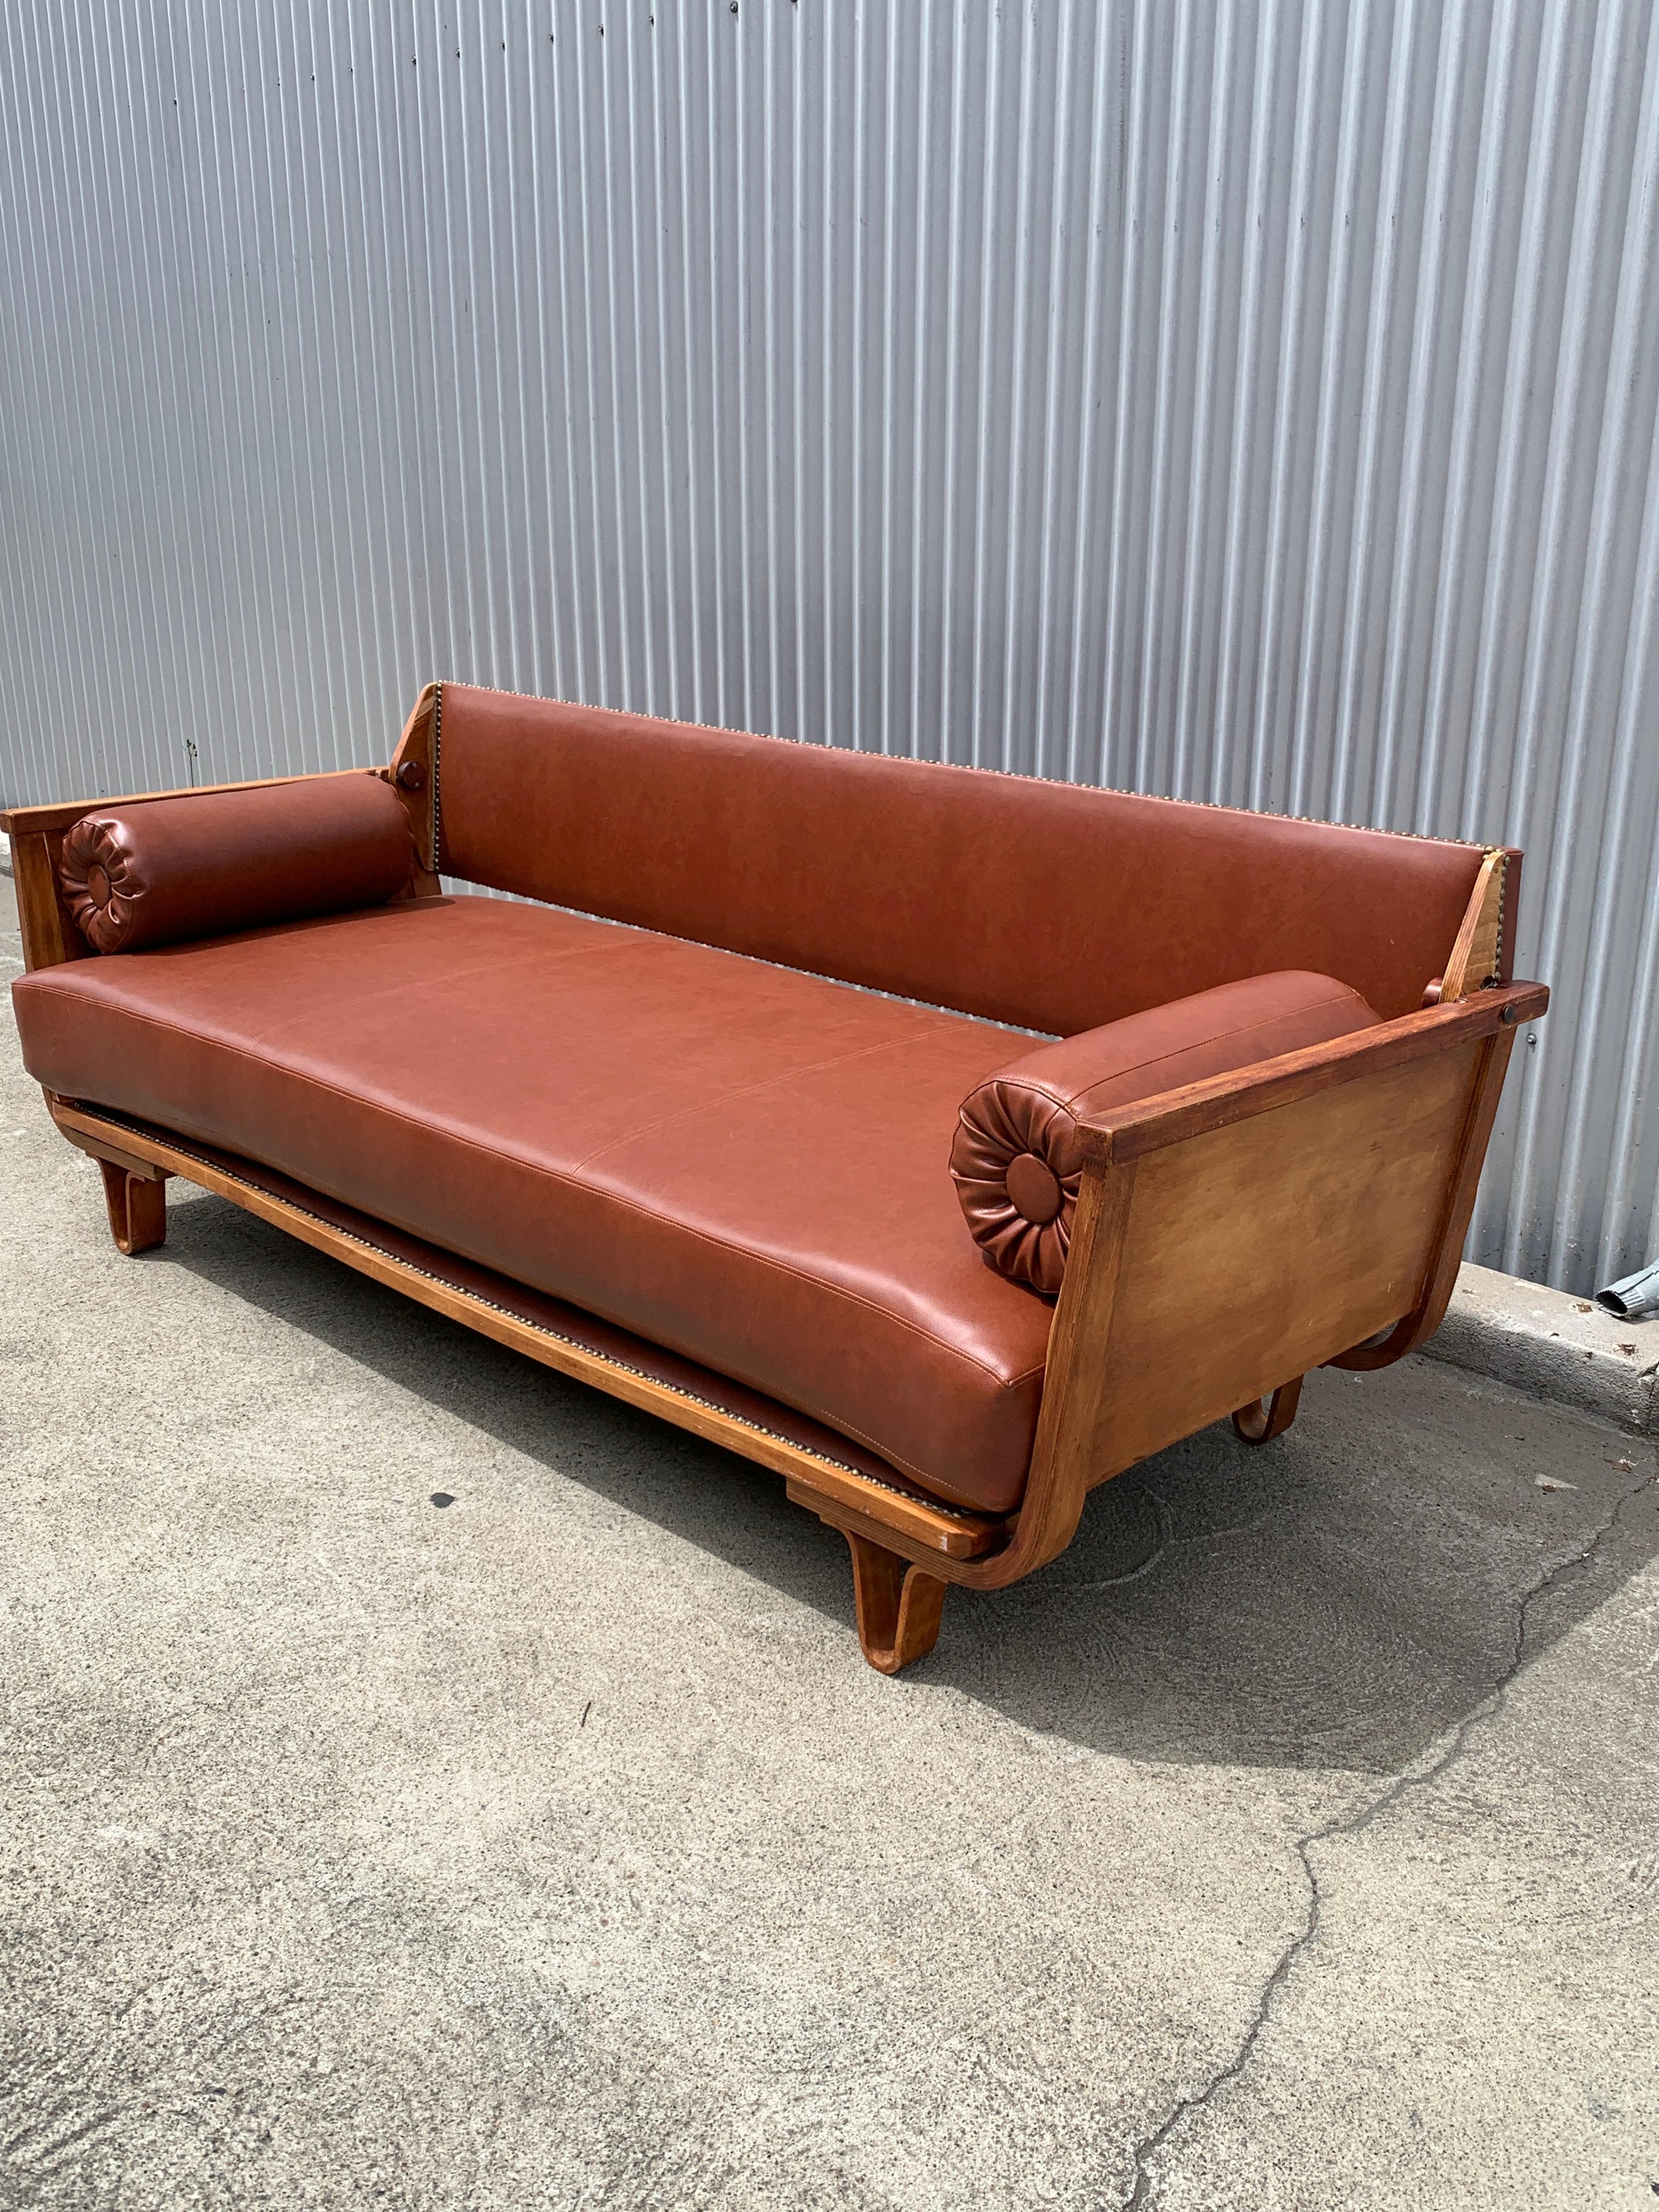 Dutch MB 01 Daybed Sofa by Cees Braakman For Sale